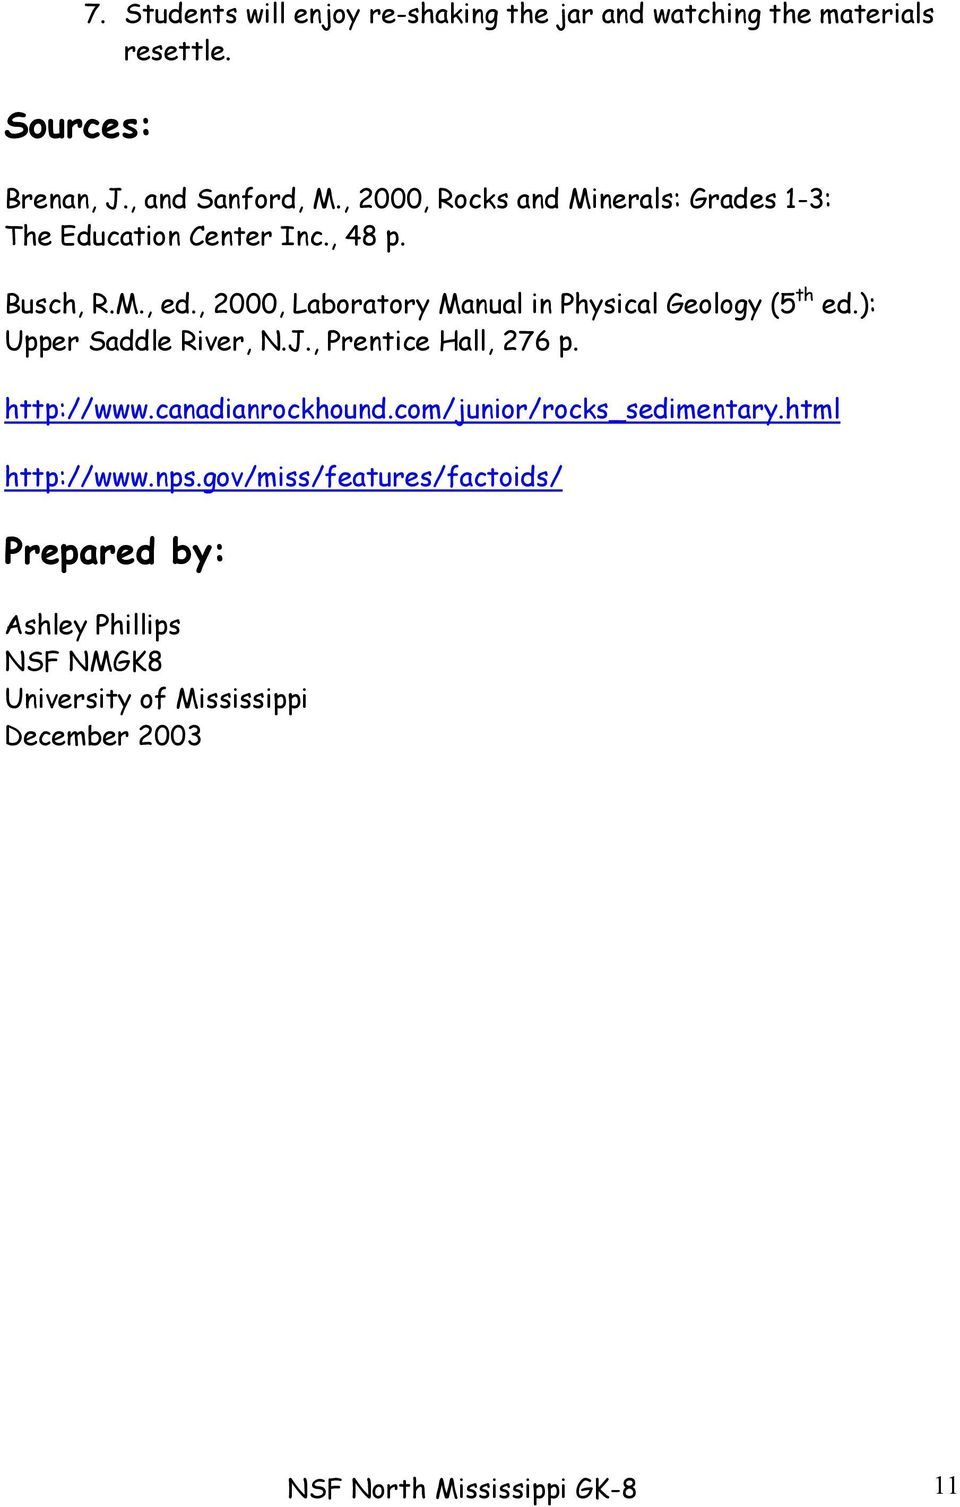 , 2000, Laboratory Manual in Physical Geology (5 th ed.): Upper Saddle River, N.J., Prentice Hall, 276 p. http://www.